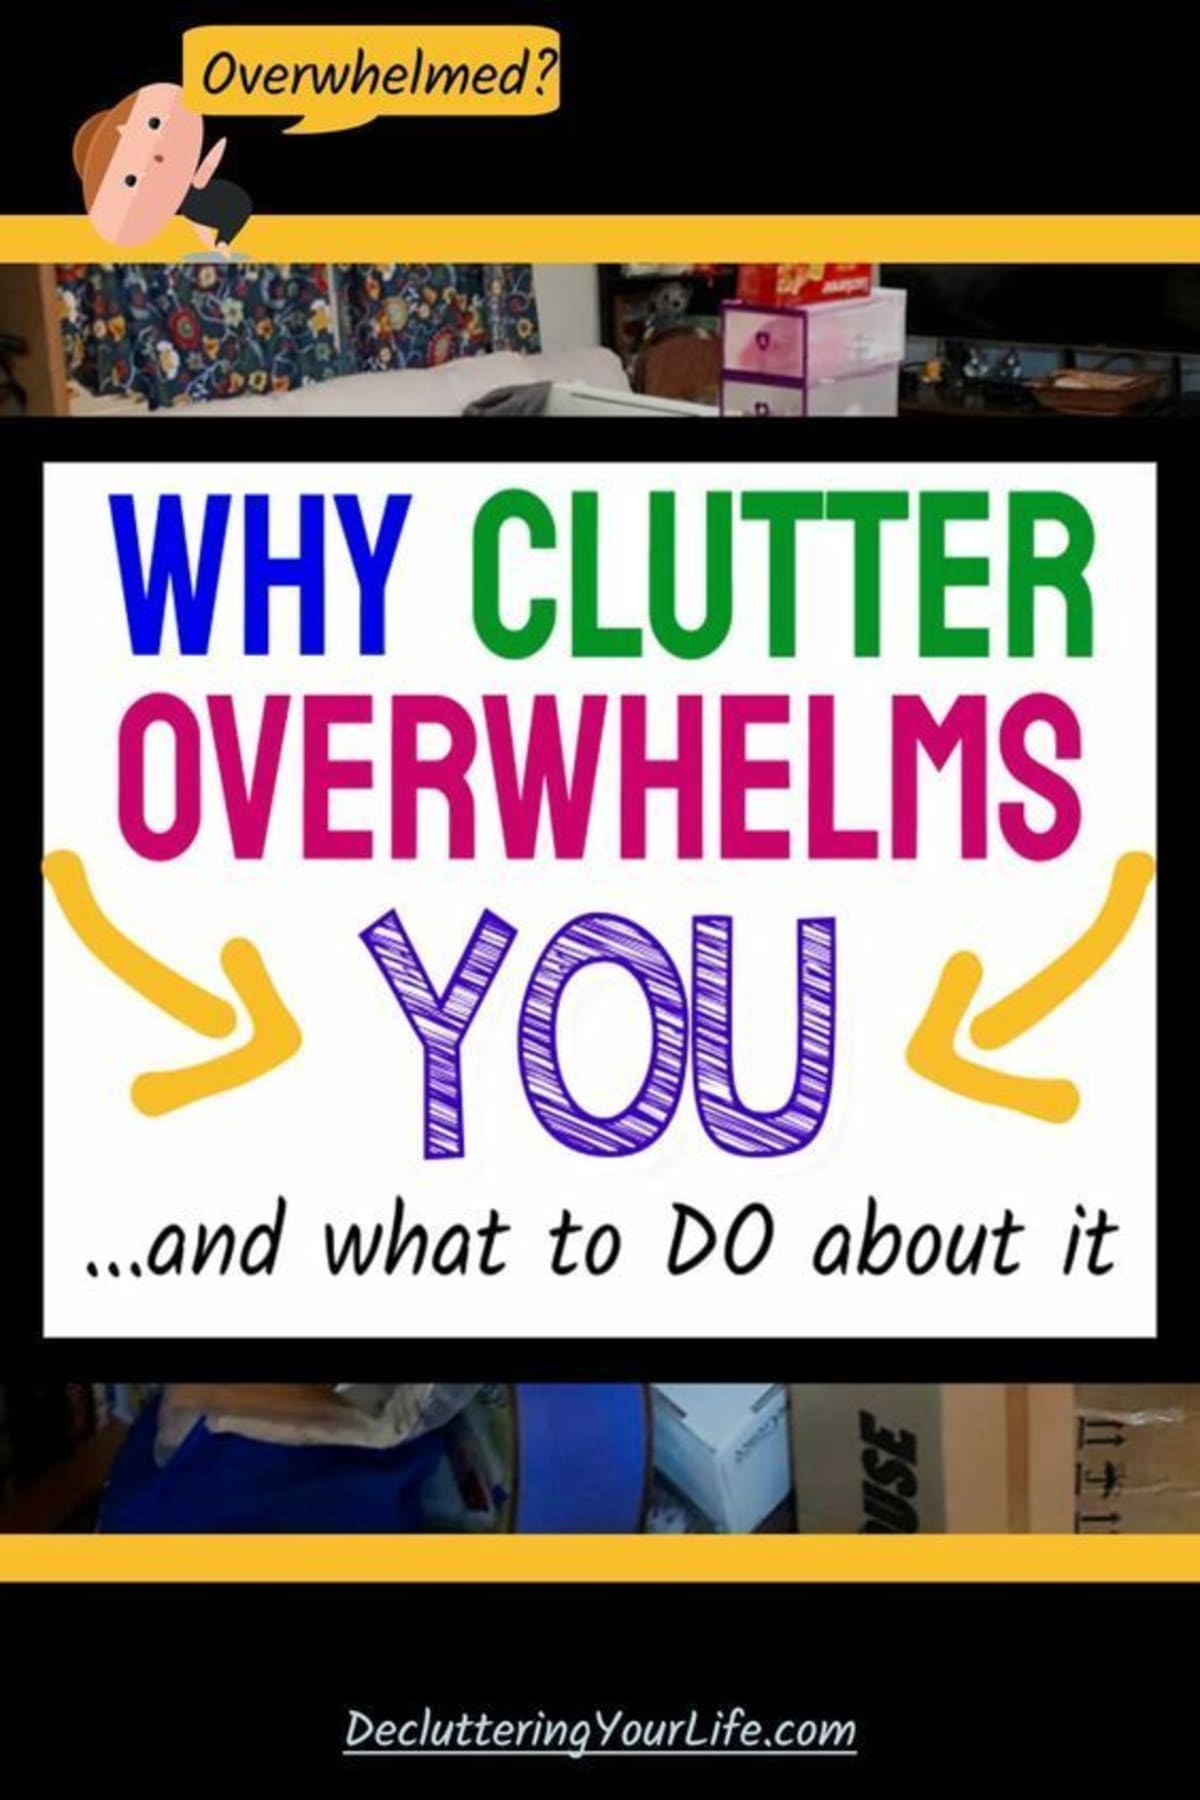 Why clutter is overwhelming